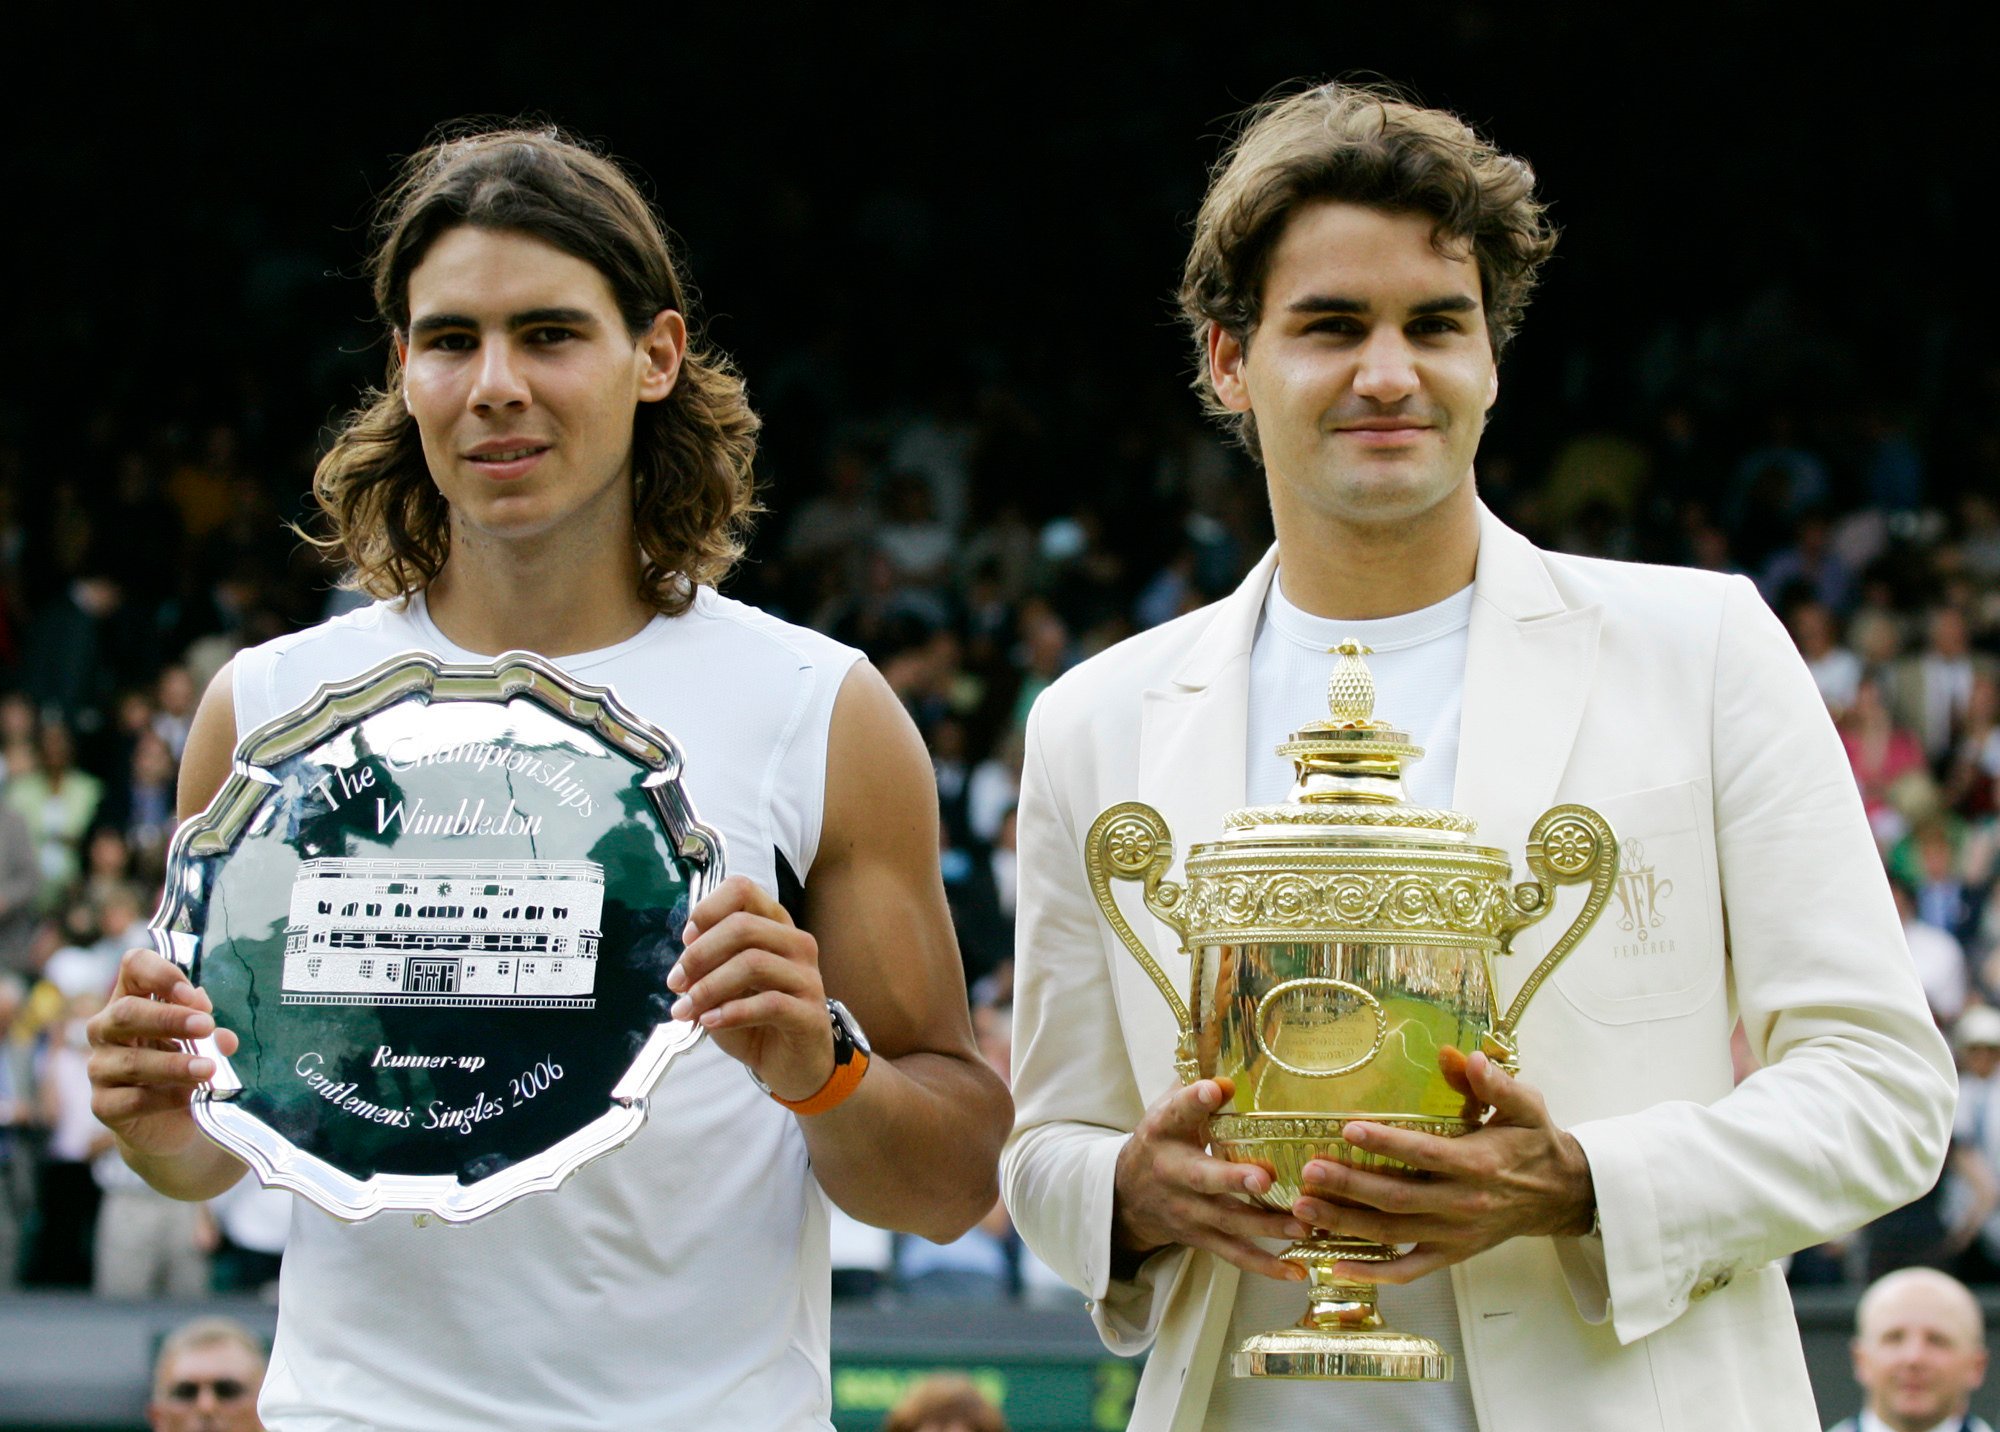 Roger Federer holds the winners’ trophy next to runner-up Rafael Nadal after the 2006 Wimbledon final. Photo: AP